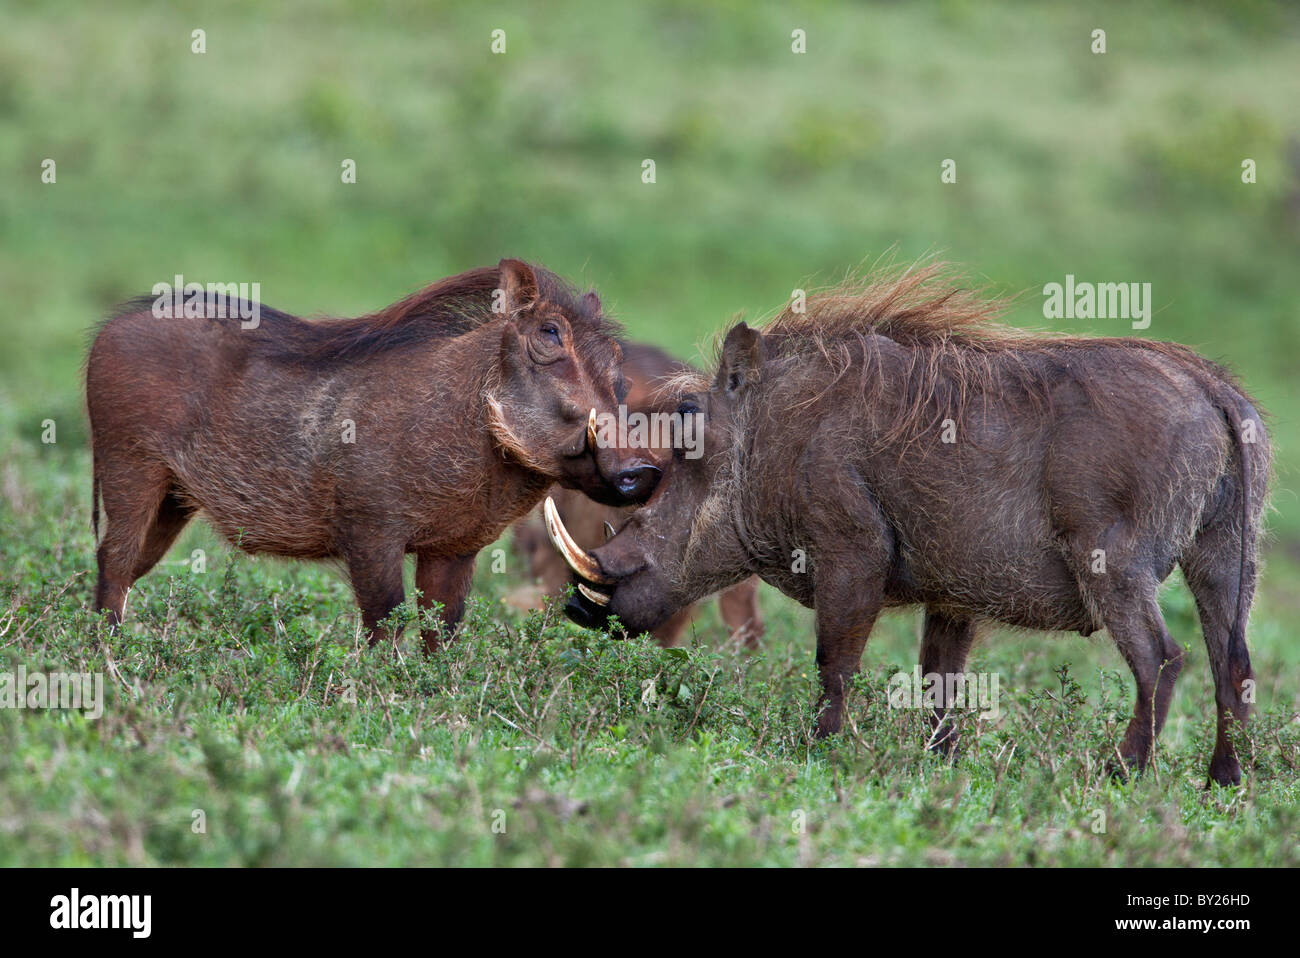 Warthog greeting or friendship in the Salient of the Aberdare National Park. Stock Photo